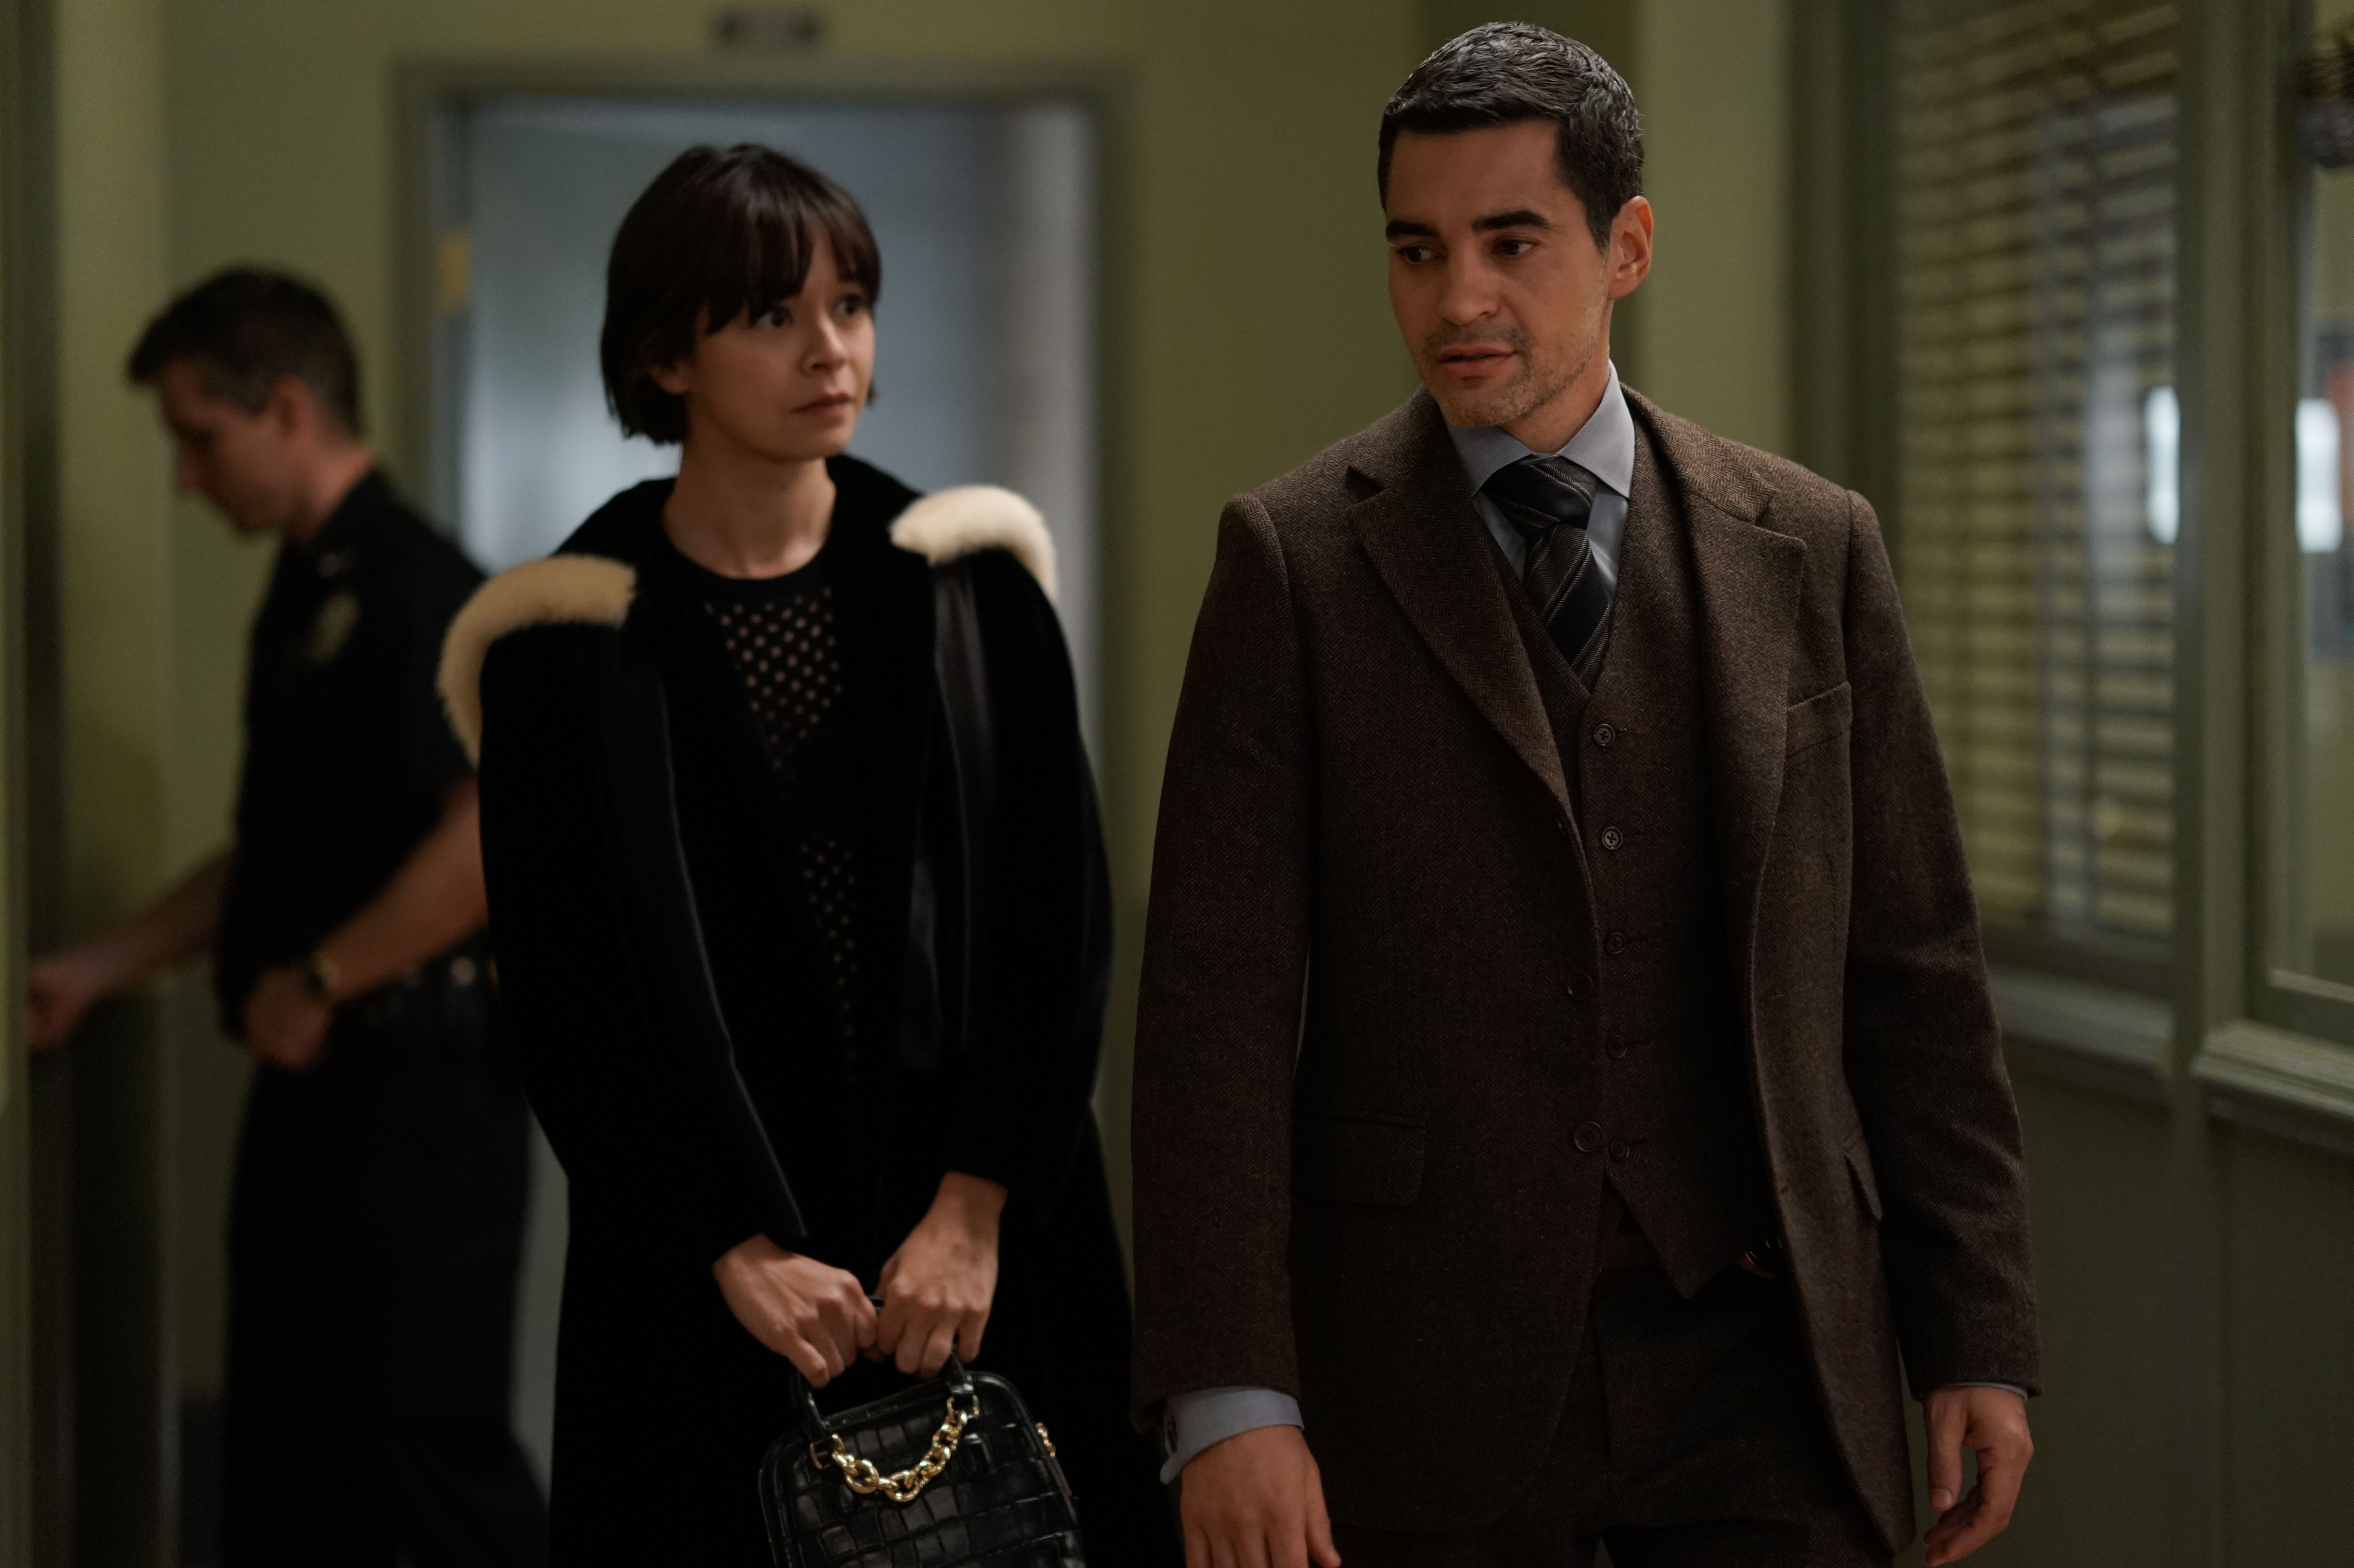 'Will Trent' Season 1 Episode 5 Recap A New Woman Enters Will's Life